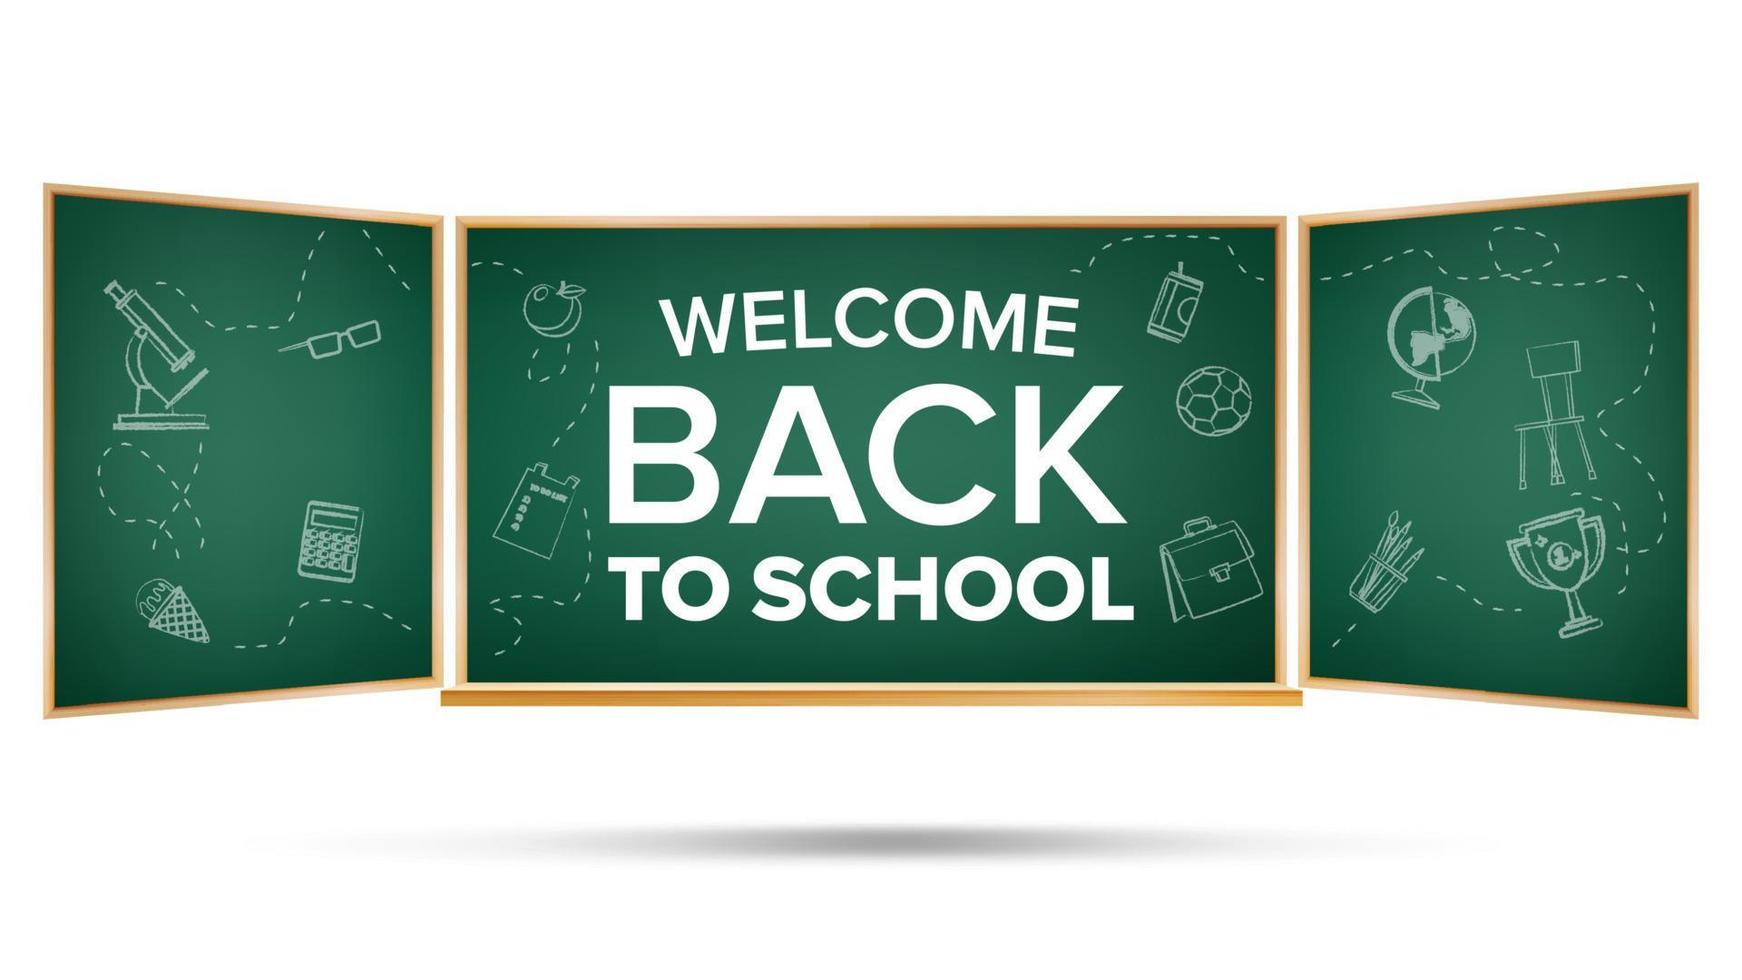 Back To School Banner Vector. Green. Classroom Chalkboard. Doodle Icons. Sale Flyer. Welcome. Retail Marketing Promotion. Realistic Illustration vector